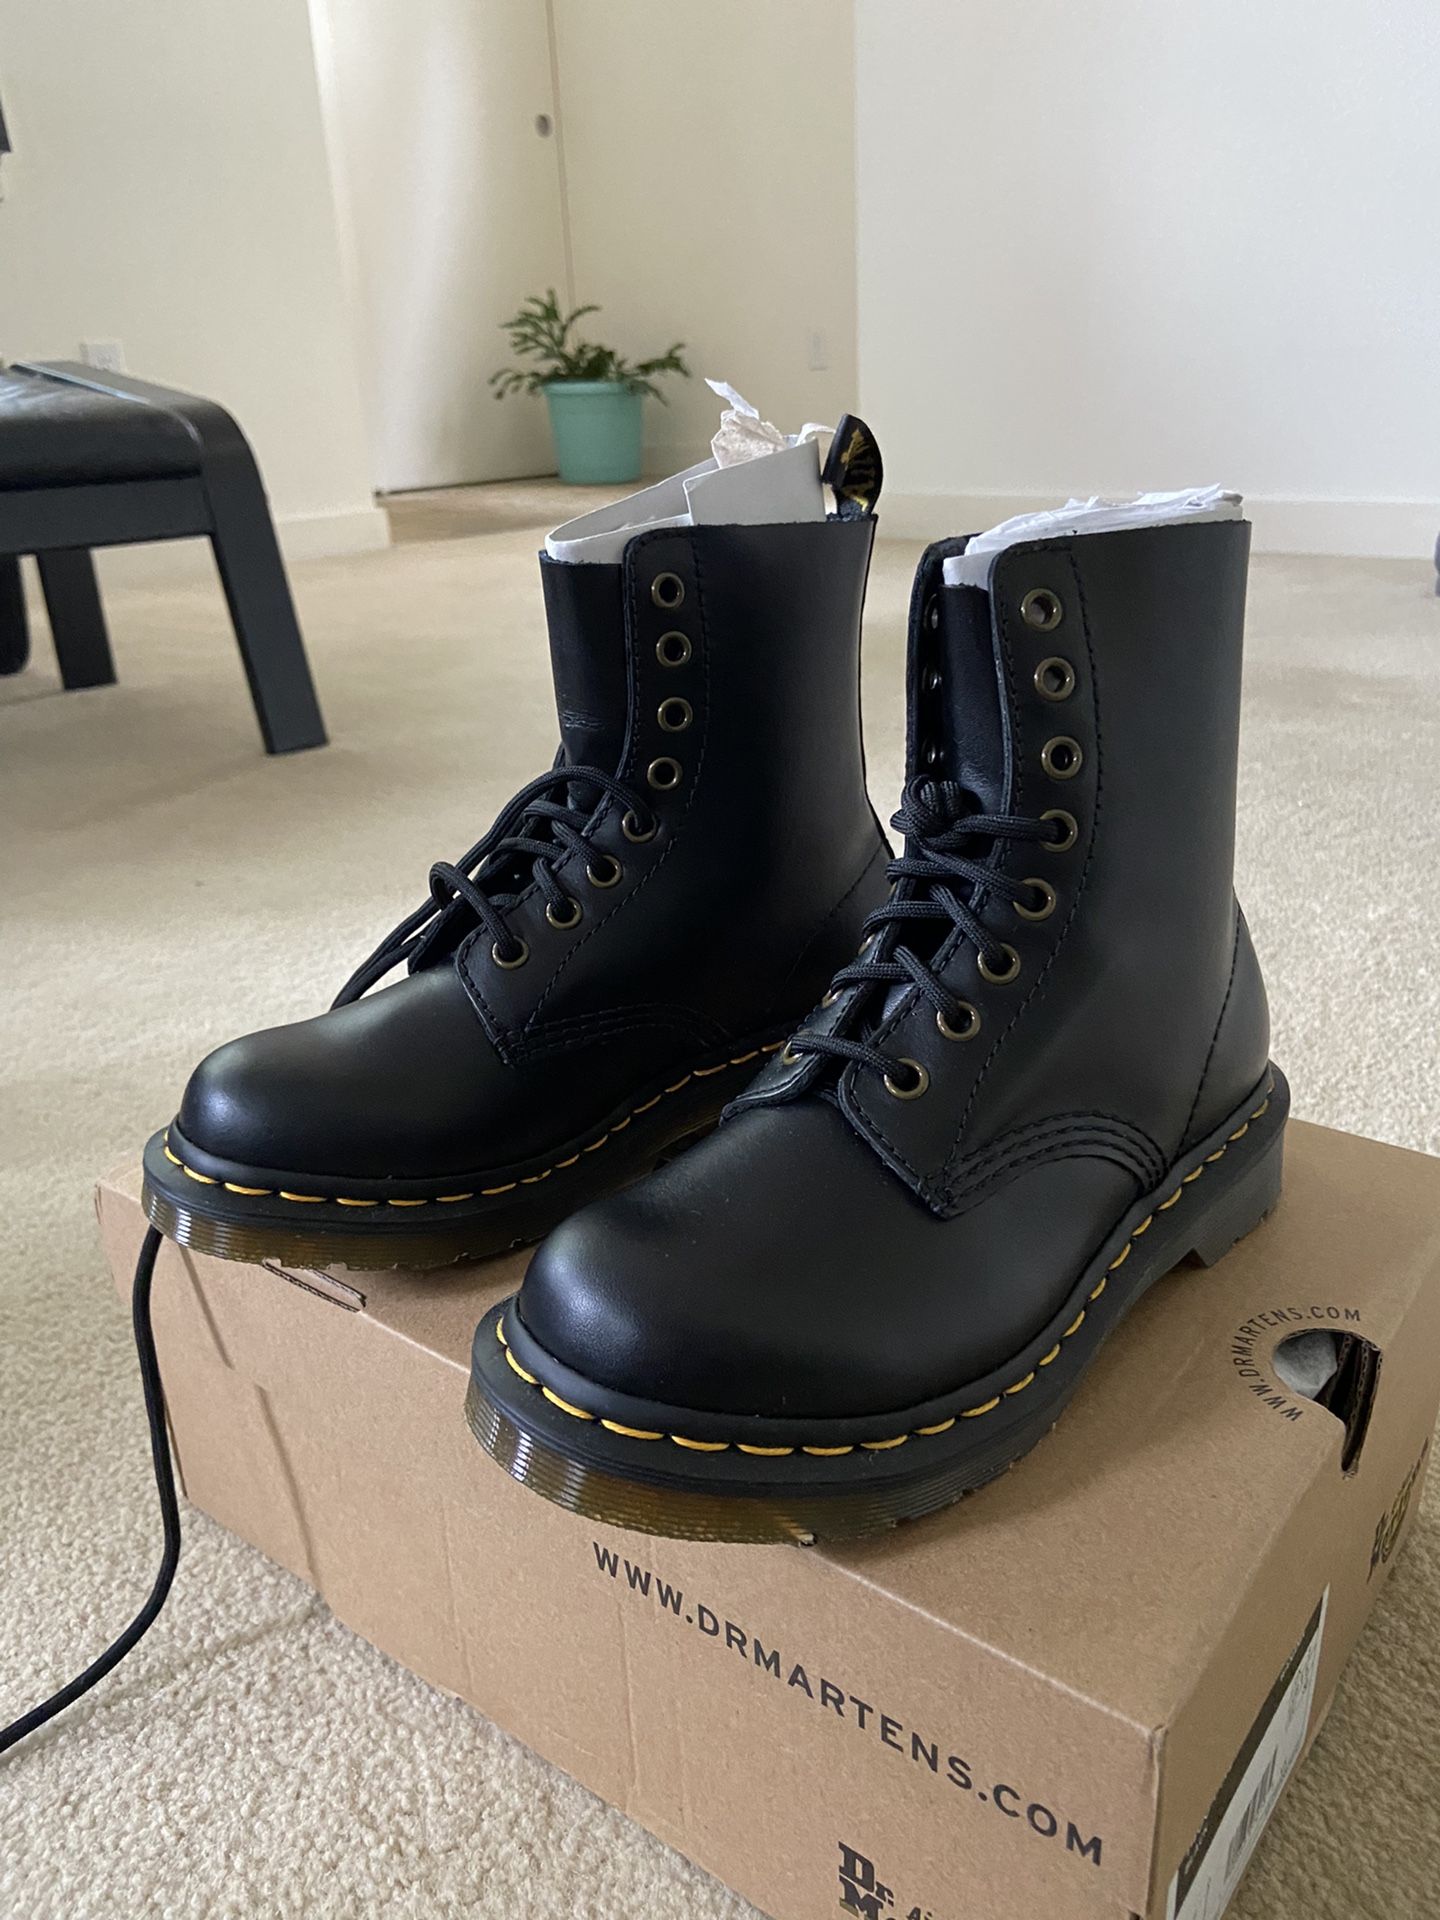 Brand new Doc Martens 1460 Pascal Wanama Leather Boots  Size 5 